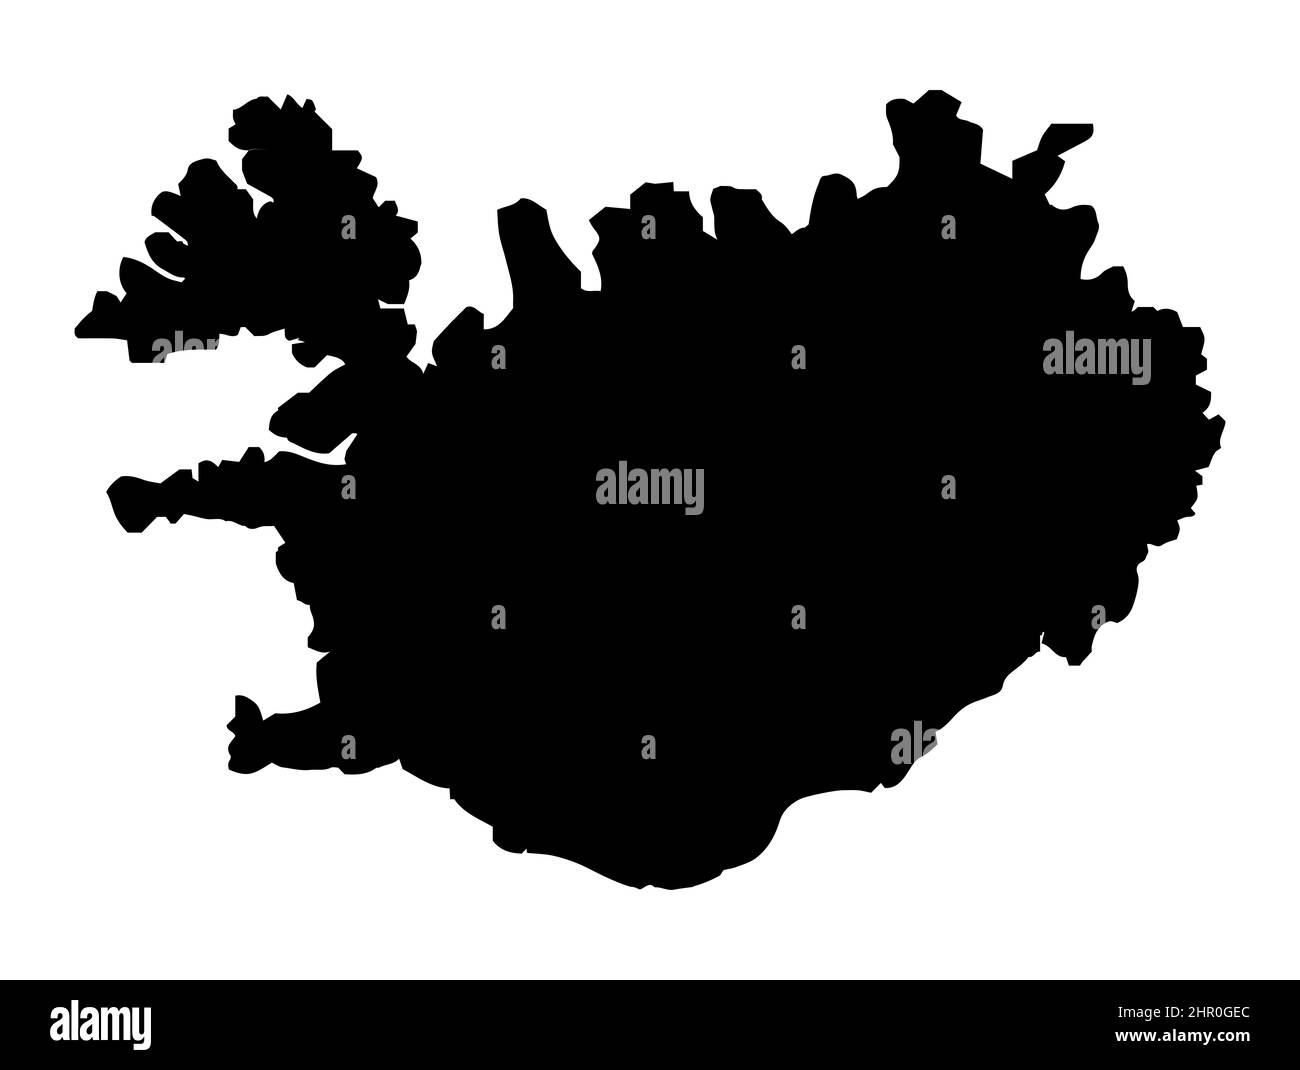 Outline silhouette map of Iceland over a white background Stock Photo